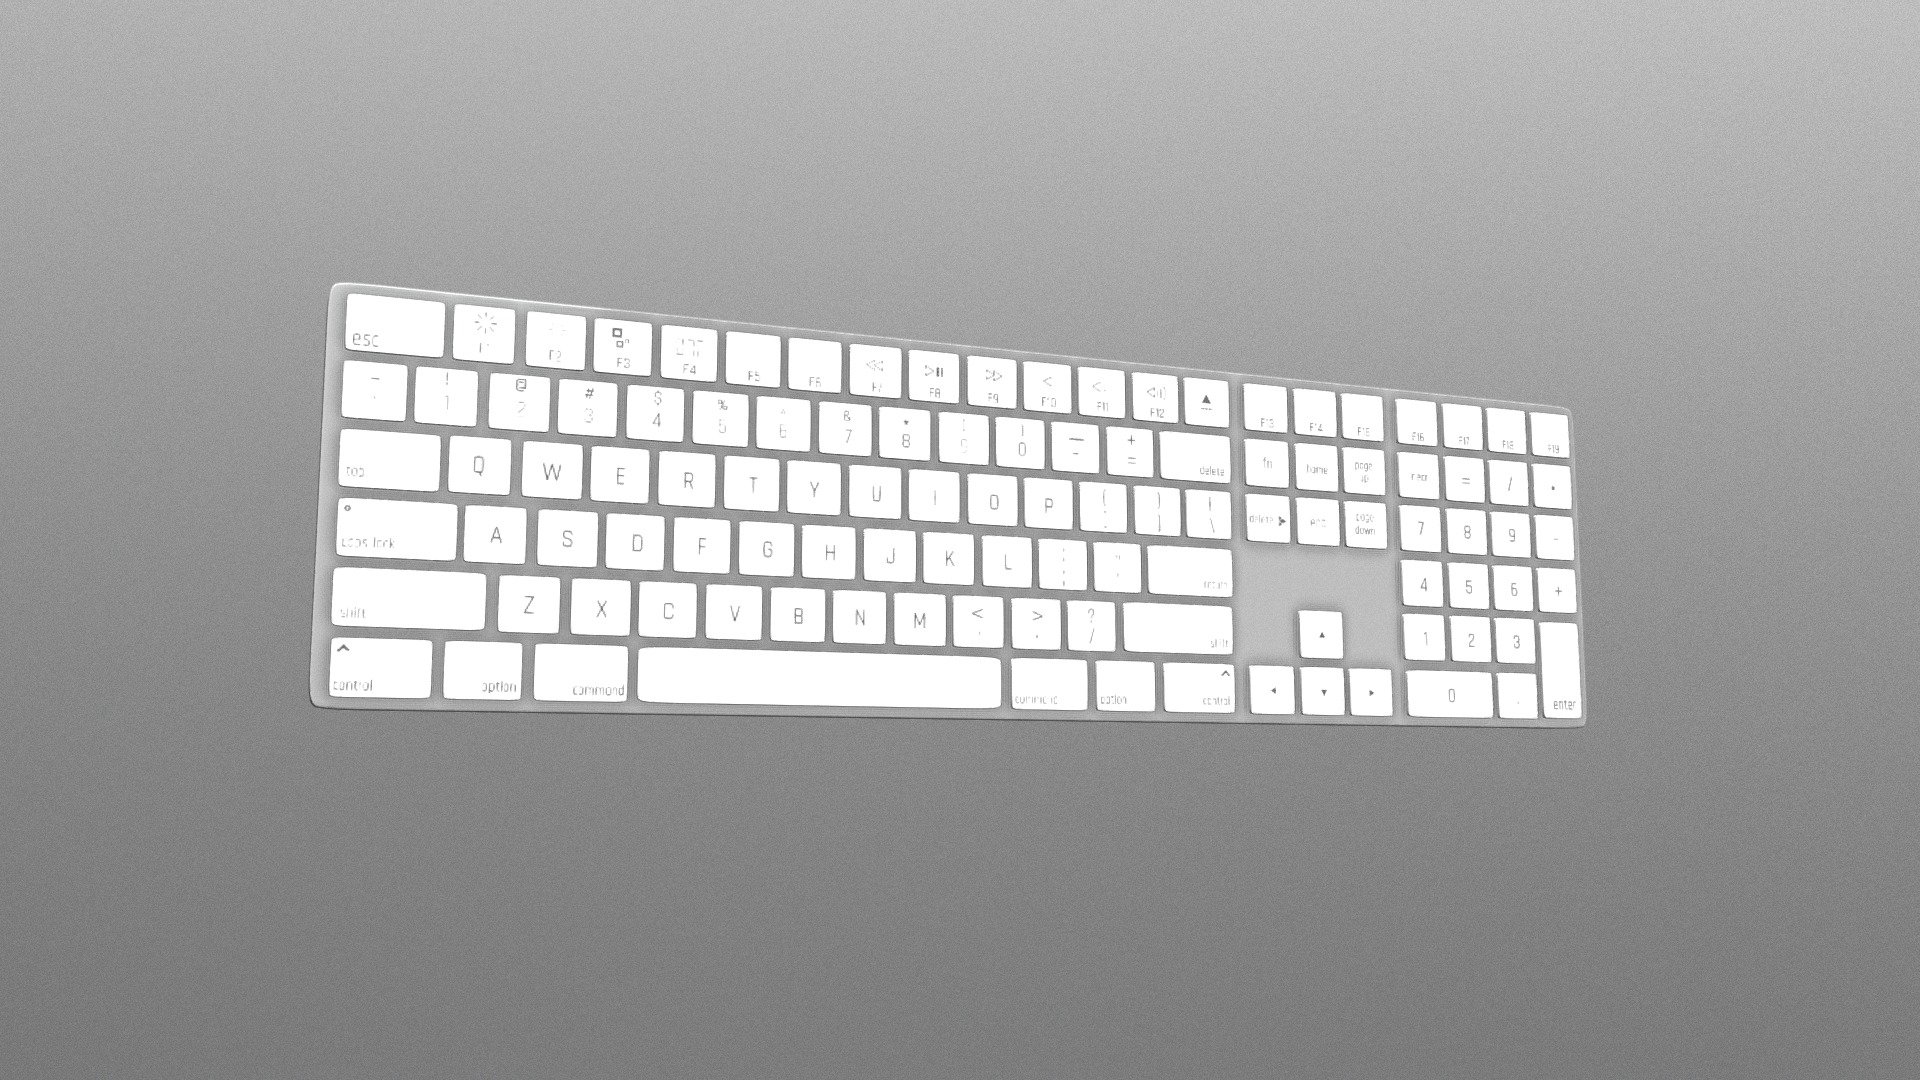 A wireless Apple Mac Magic Keyboard, modeled in Maya, Textured in Substance Painter, used as a base piece for some experimentation in a larger project 3d model